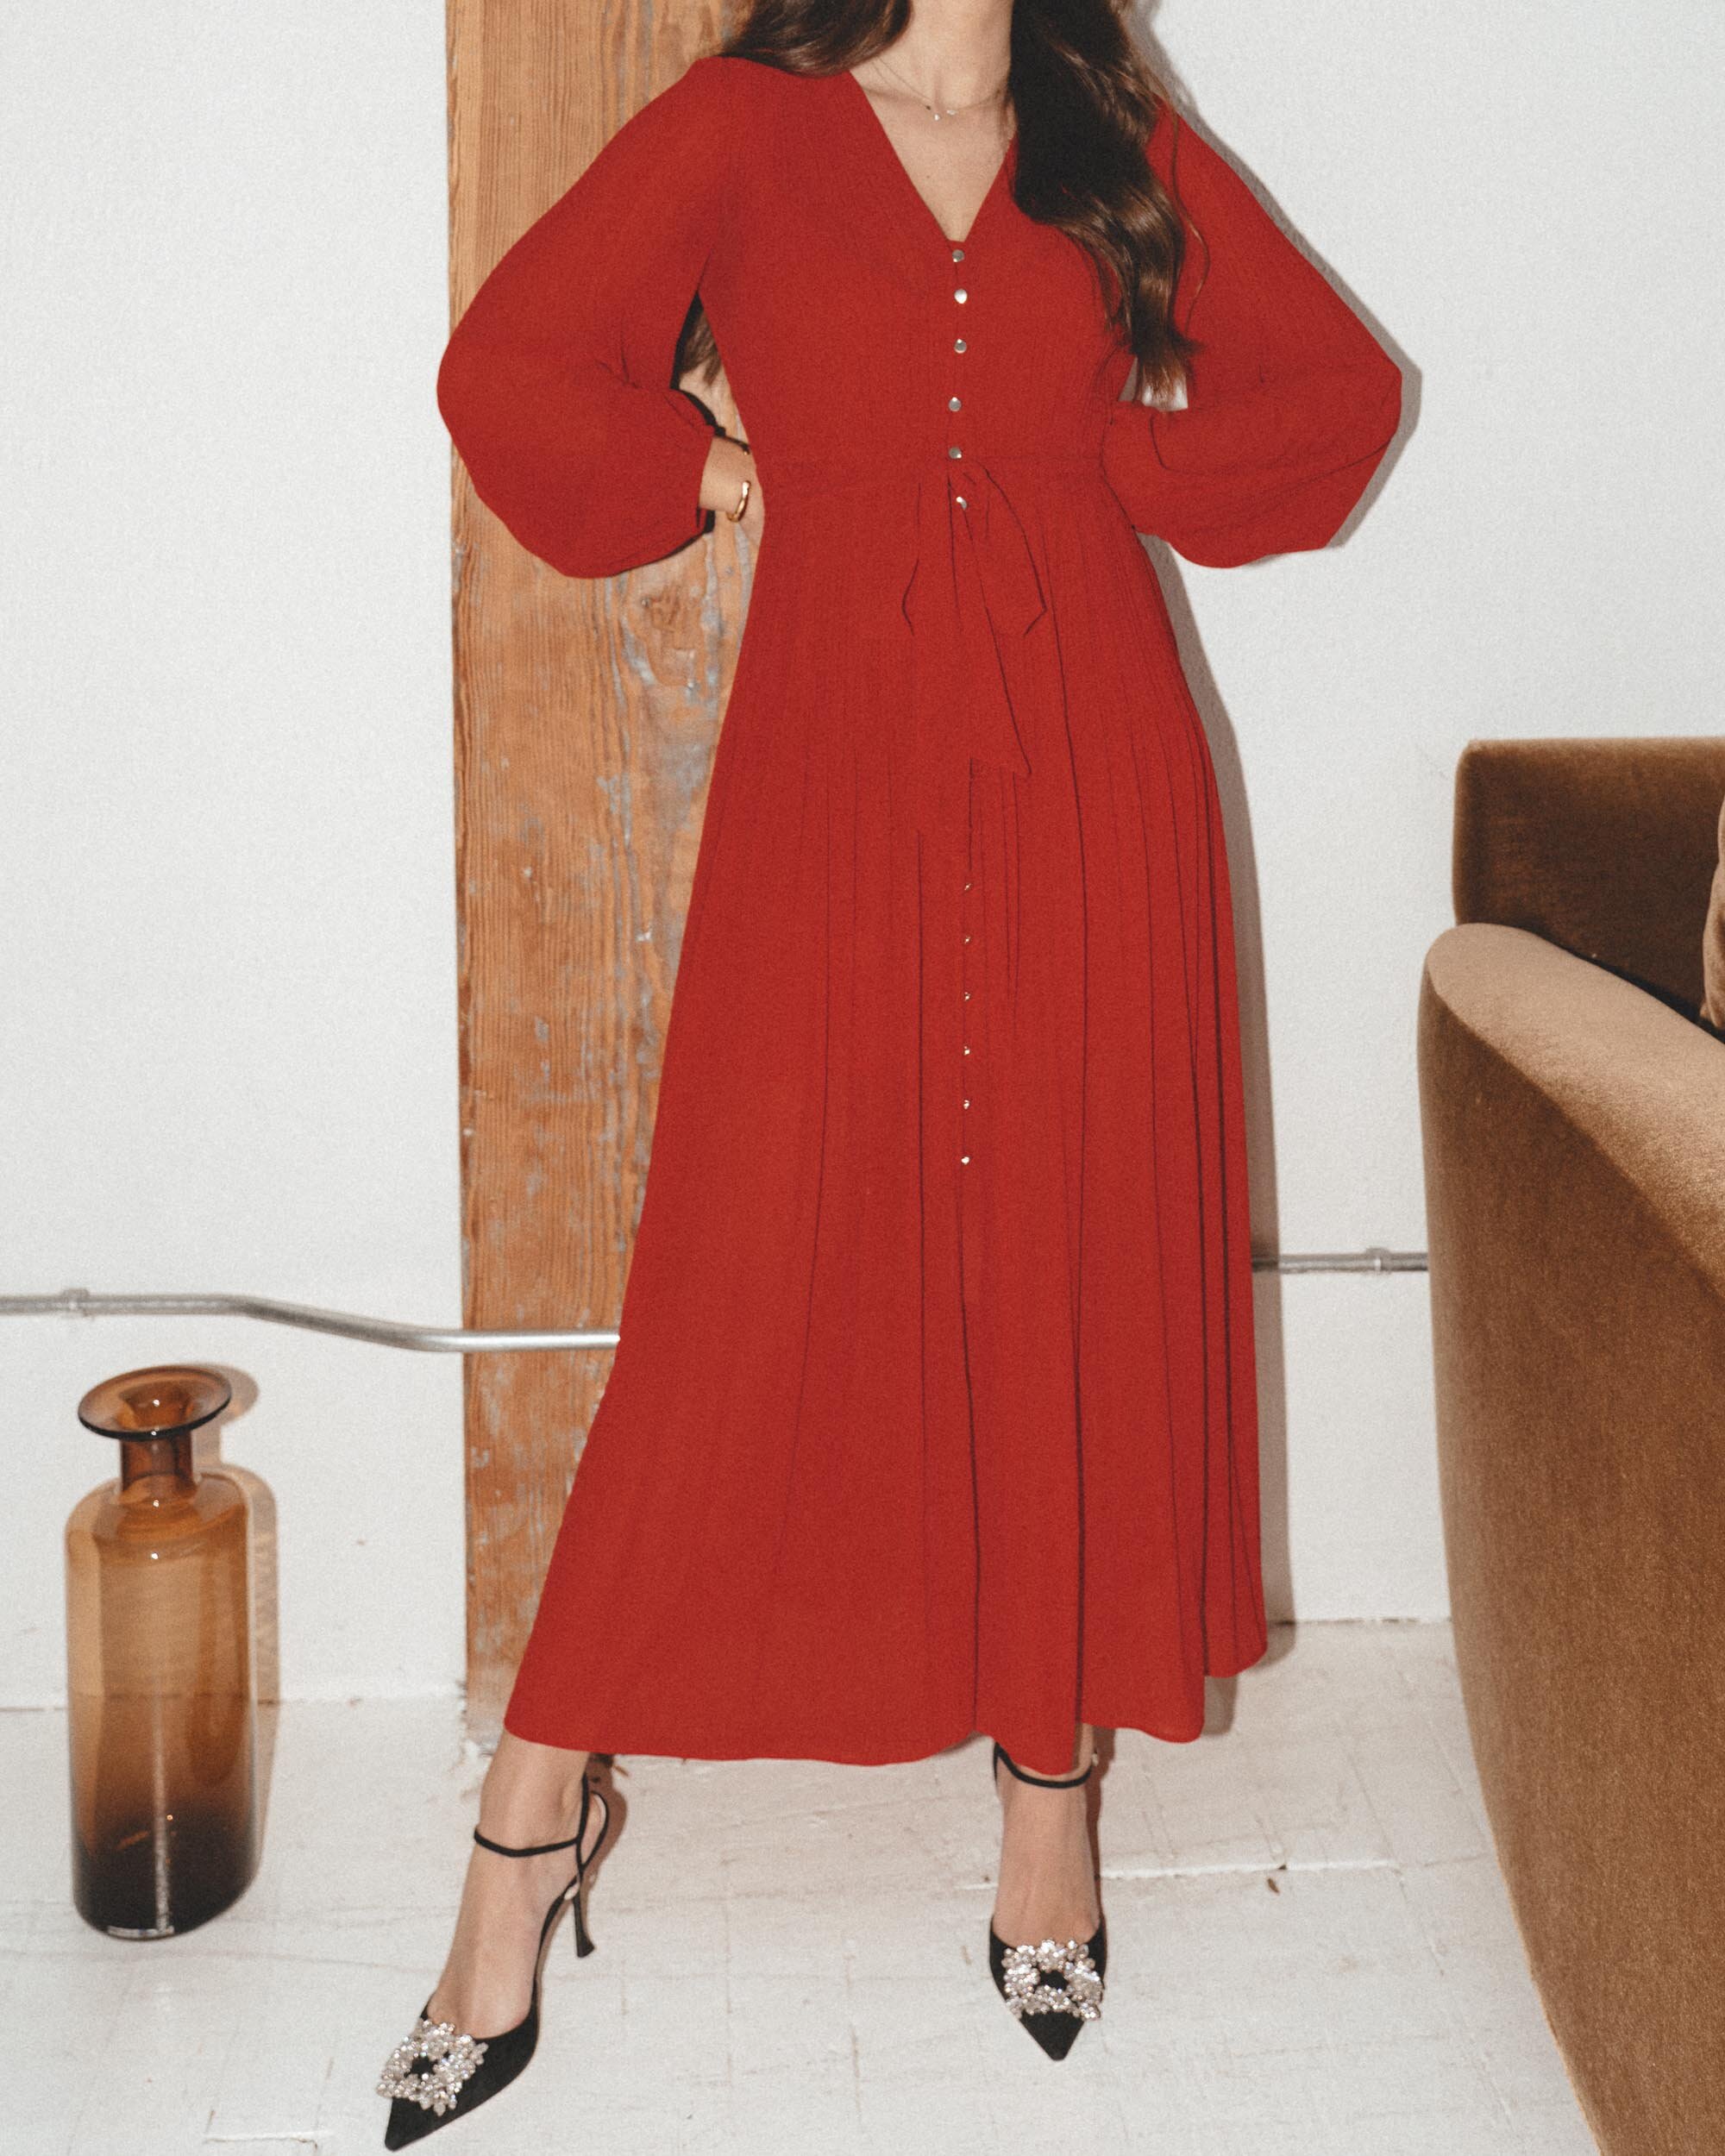 Sarah Butler of @sarahchristine wearing Maje Rochi Long Sleeve Red Pleated Maxi Dress with Belt in Seattle, Washington --4.jpg